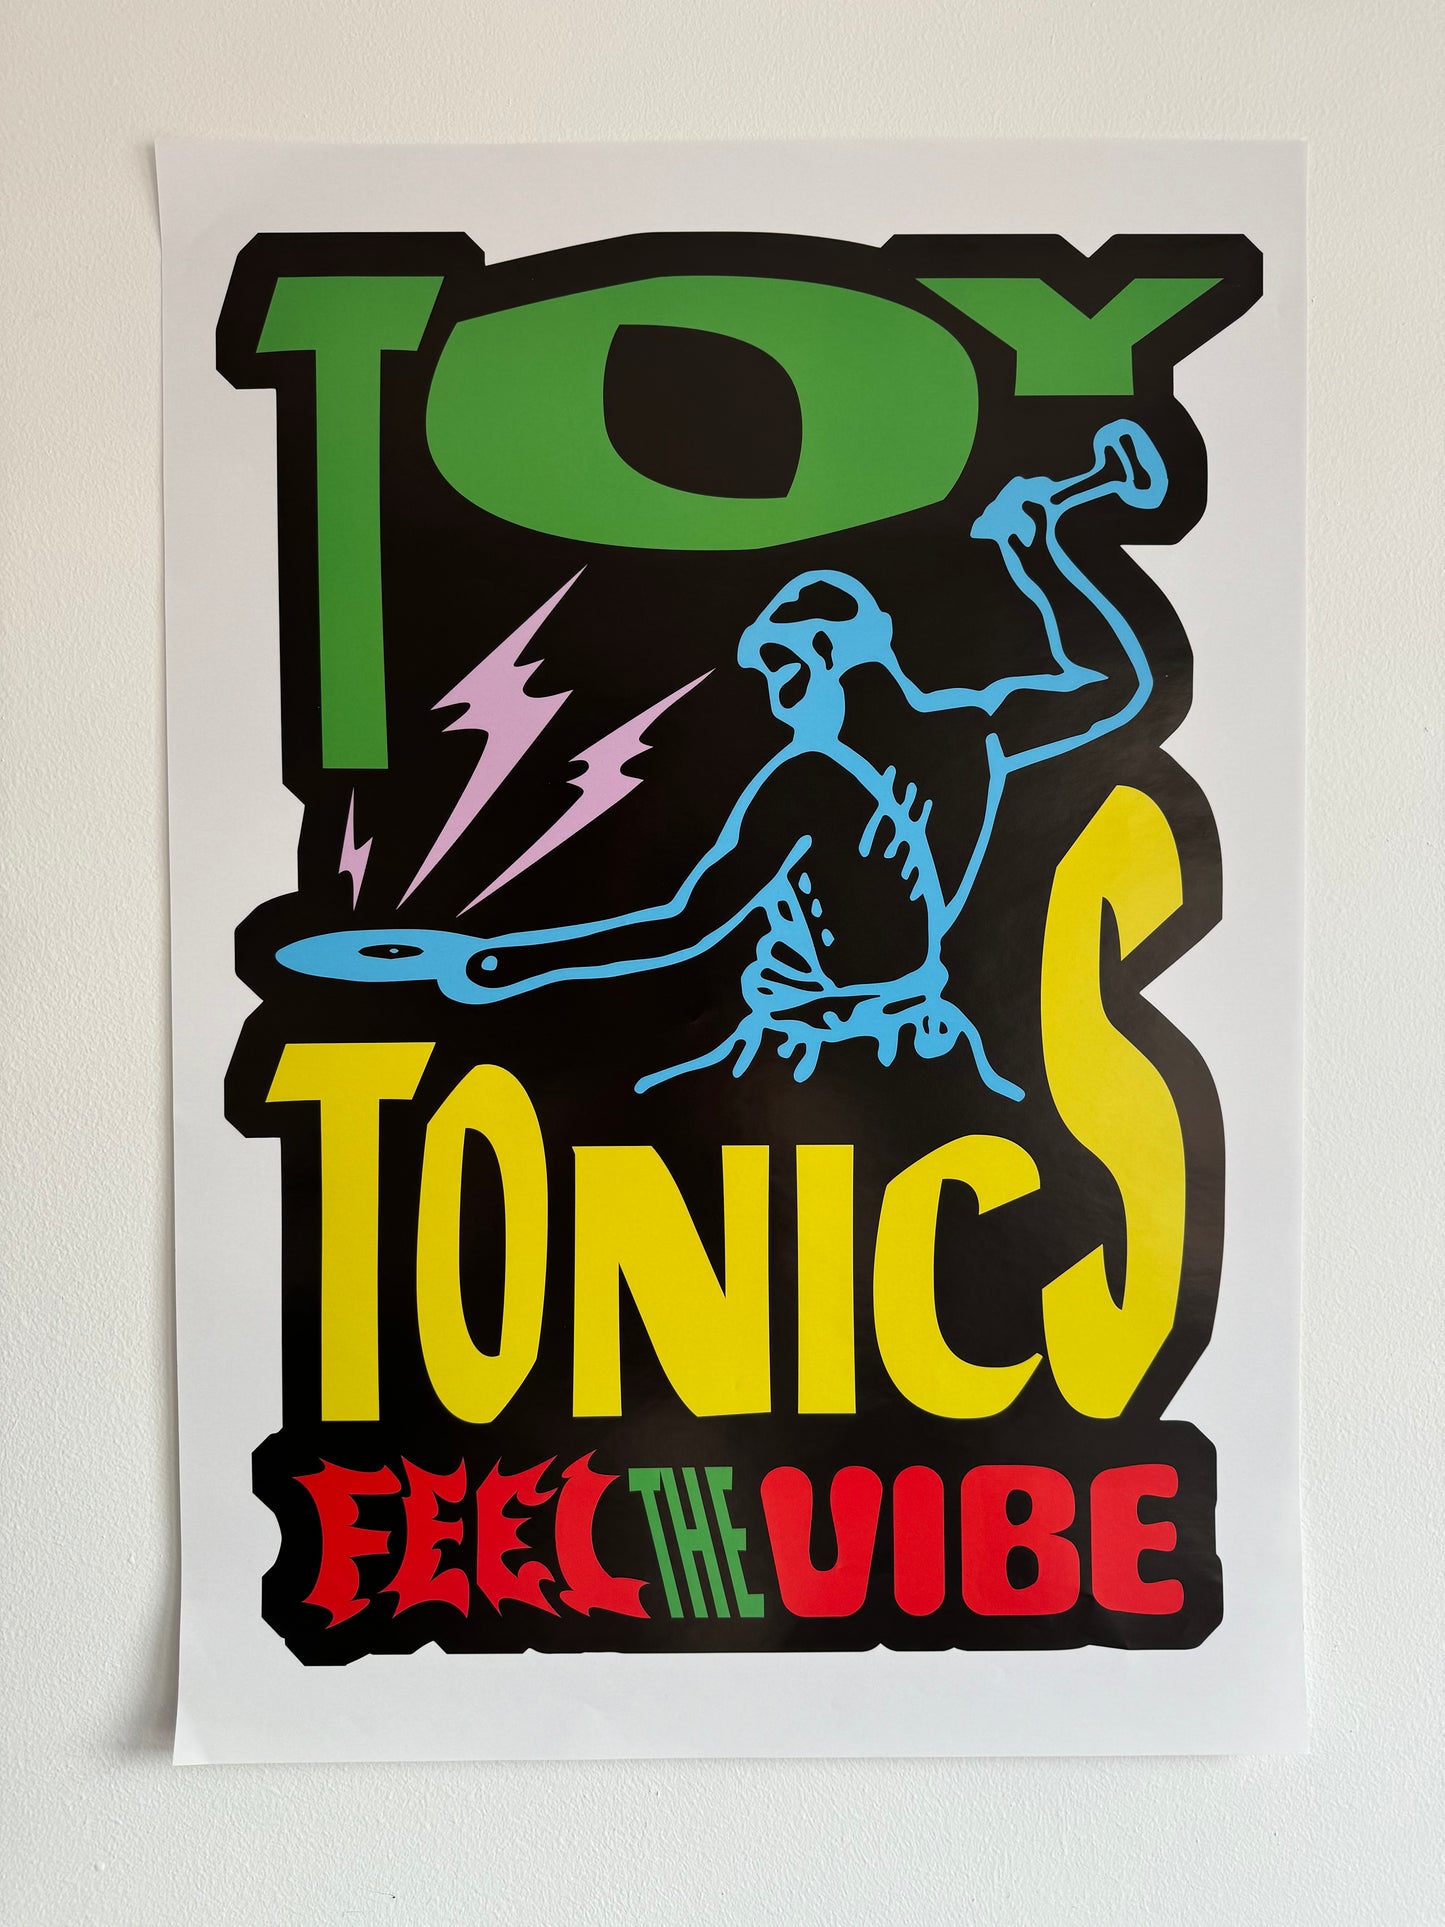 Toy Tonics Feel the Vibe - Poster